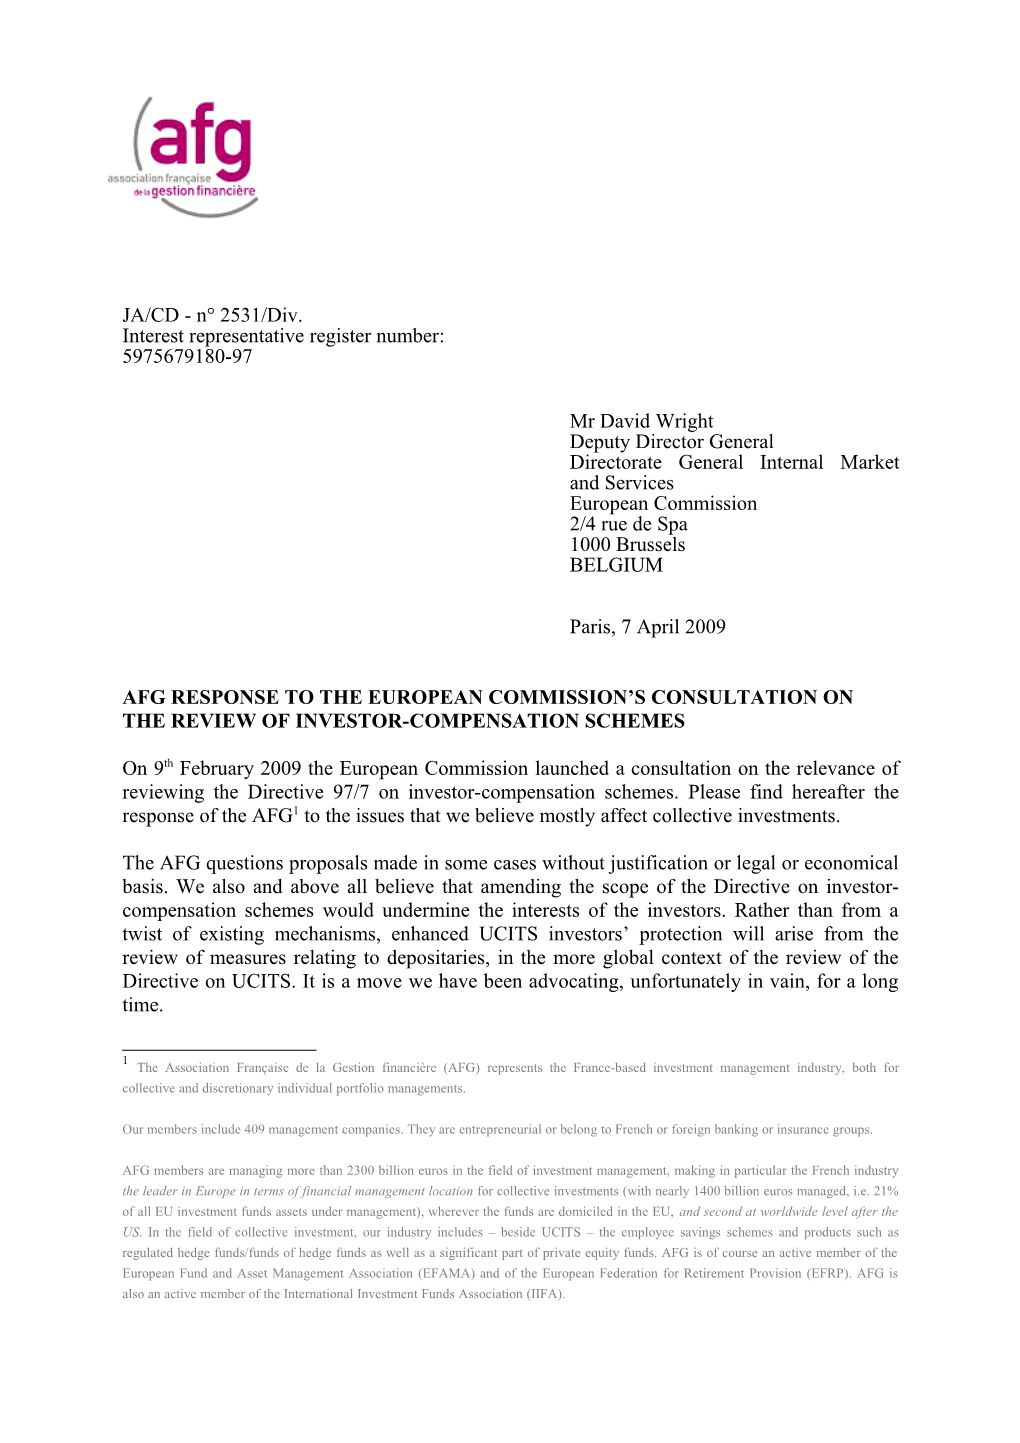 Response of the QFG to the Consultation of the European Commission on the Review Of